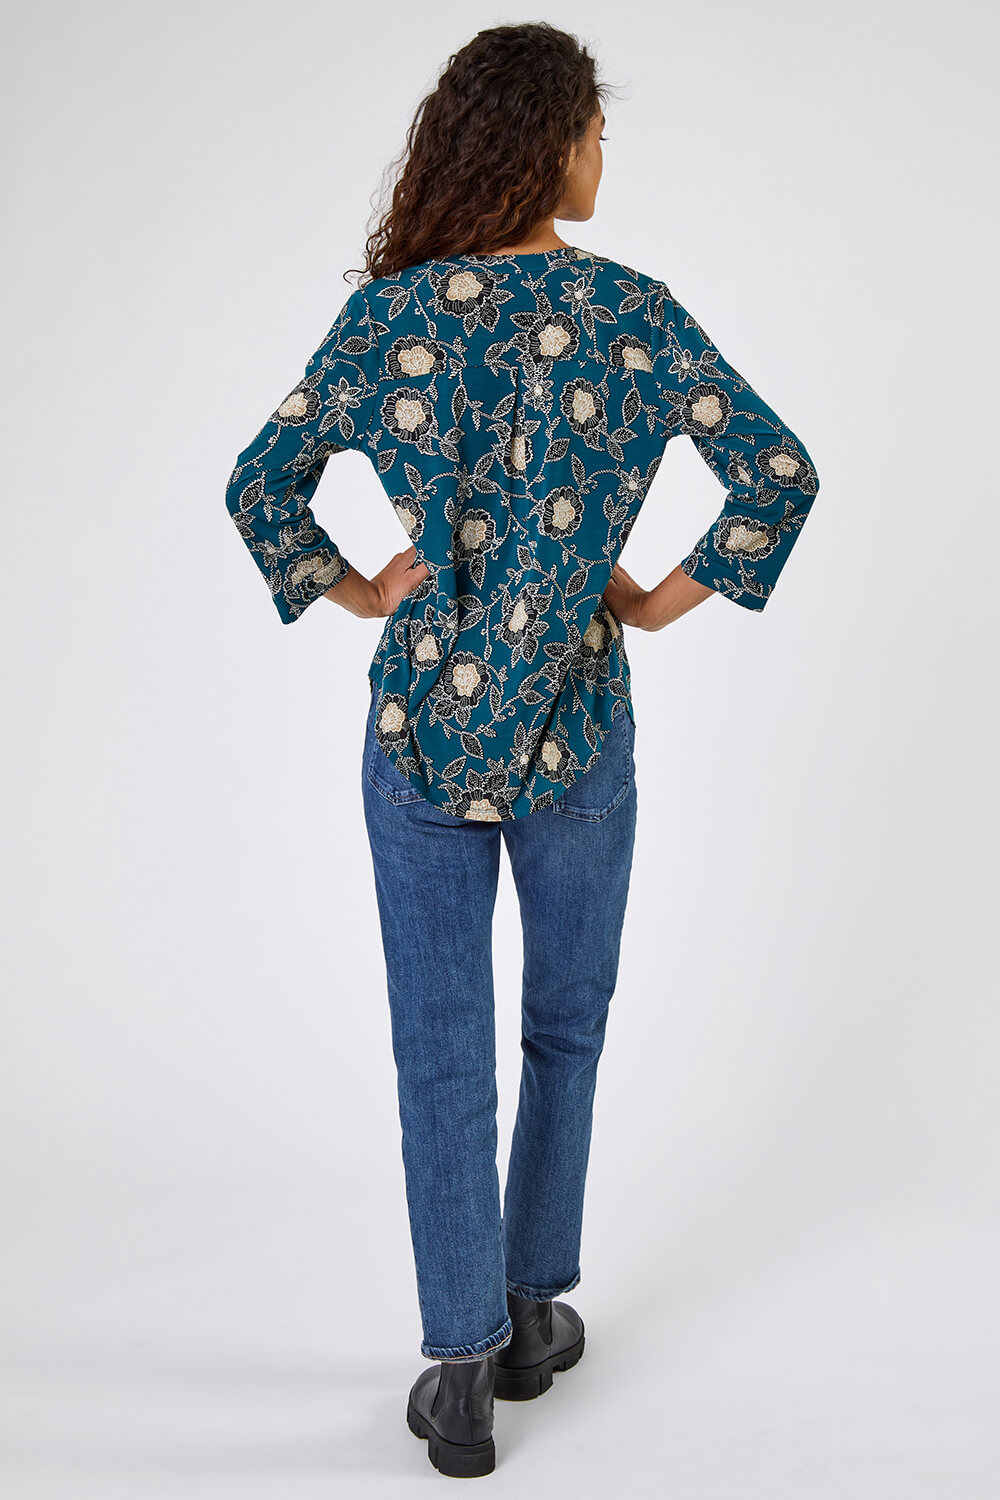 Green Textured Floral Print Notch Neck Top, Image 2 of 5